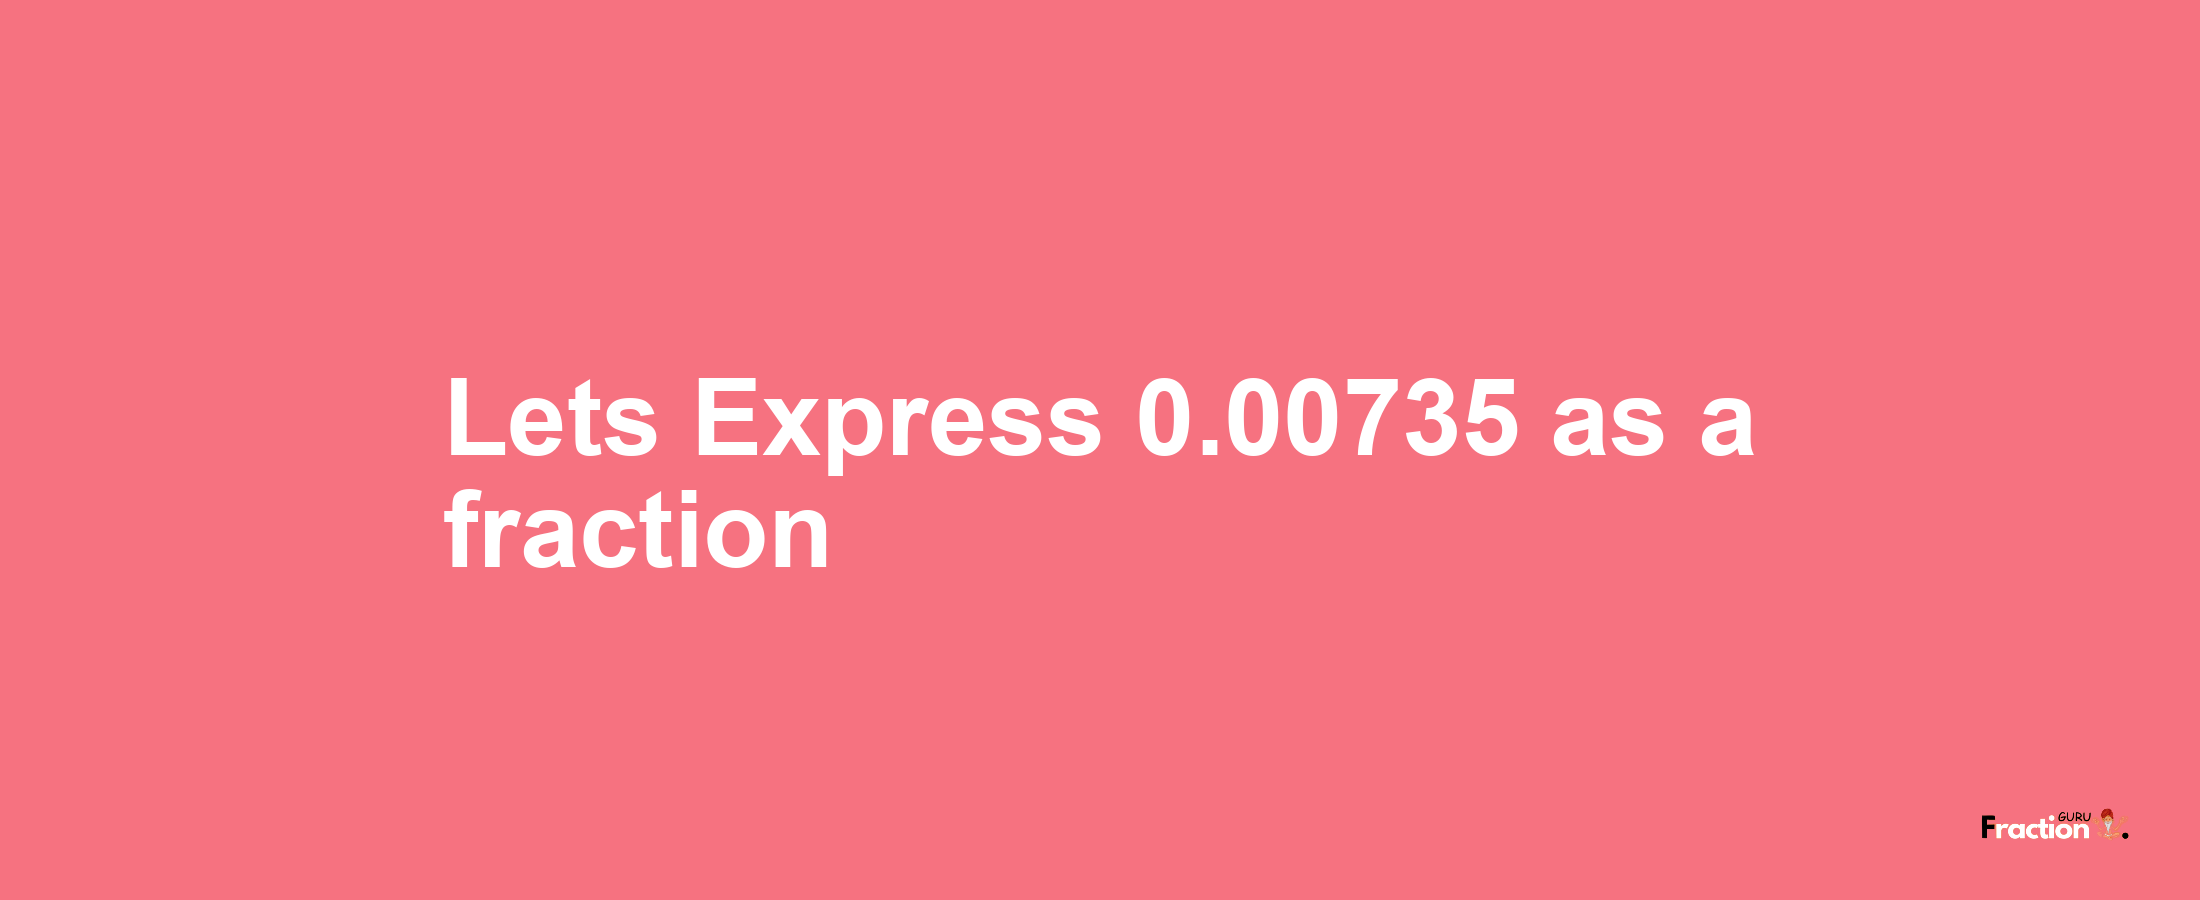 Lets Express 0.00735 as afraction